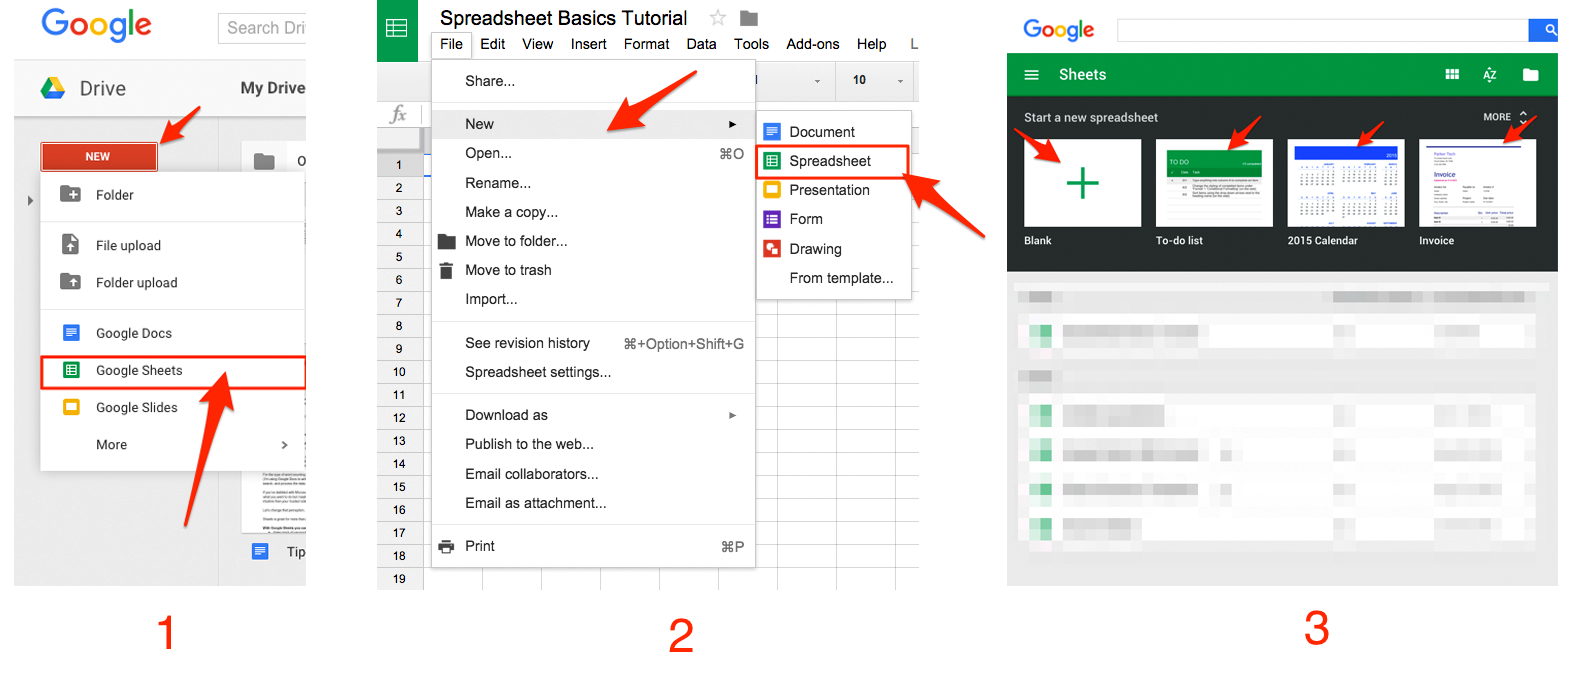 How To Do A Google Spreadsheet Throughout Google Sheets 101: The Beginner's Guide To Online Spreadsheets  The